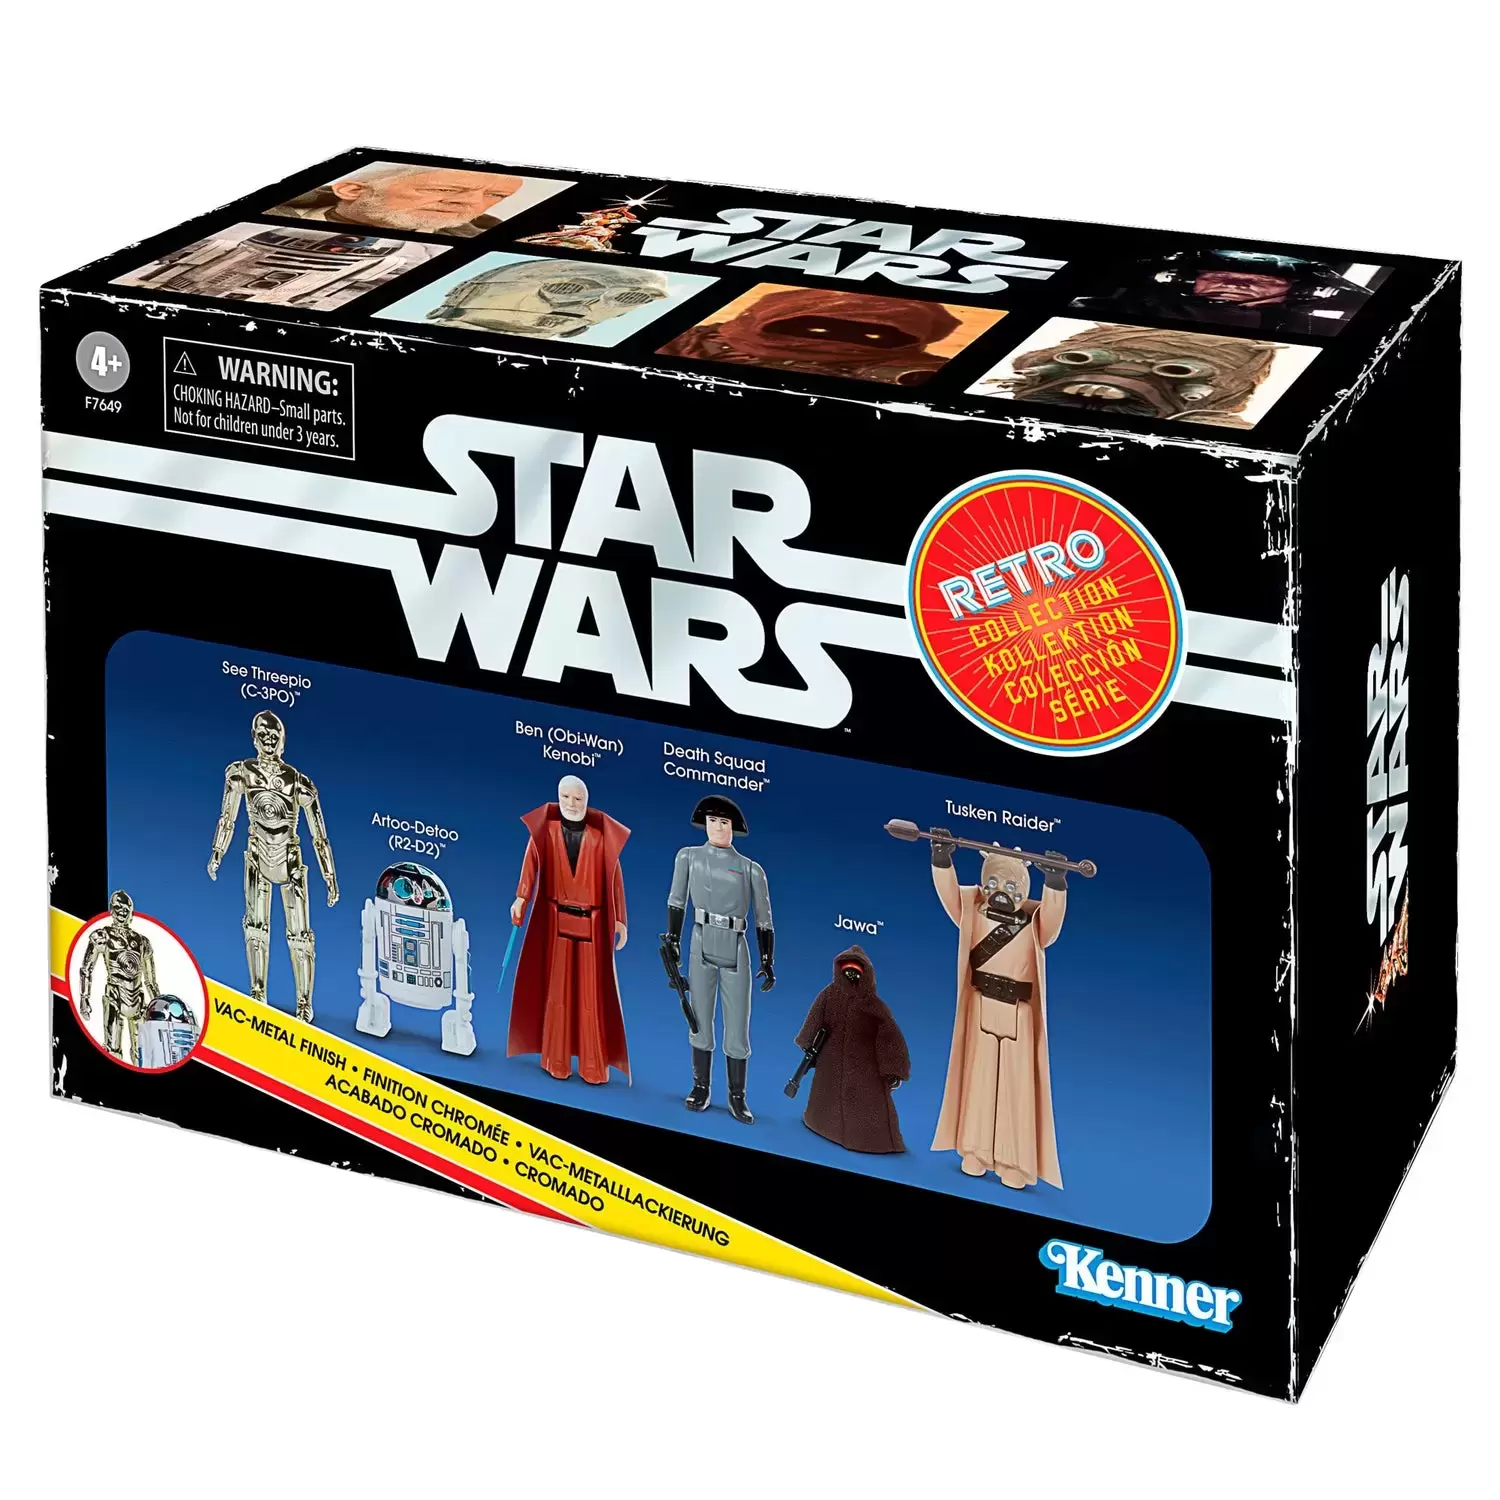 Retro Collection - Star Wars: A New Hope Collectible Figures Multipack